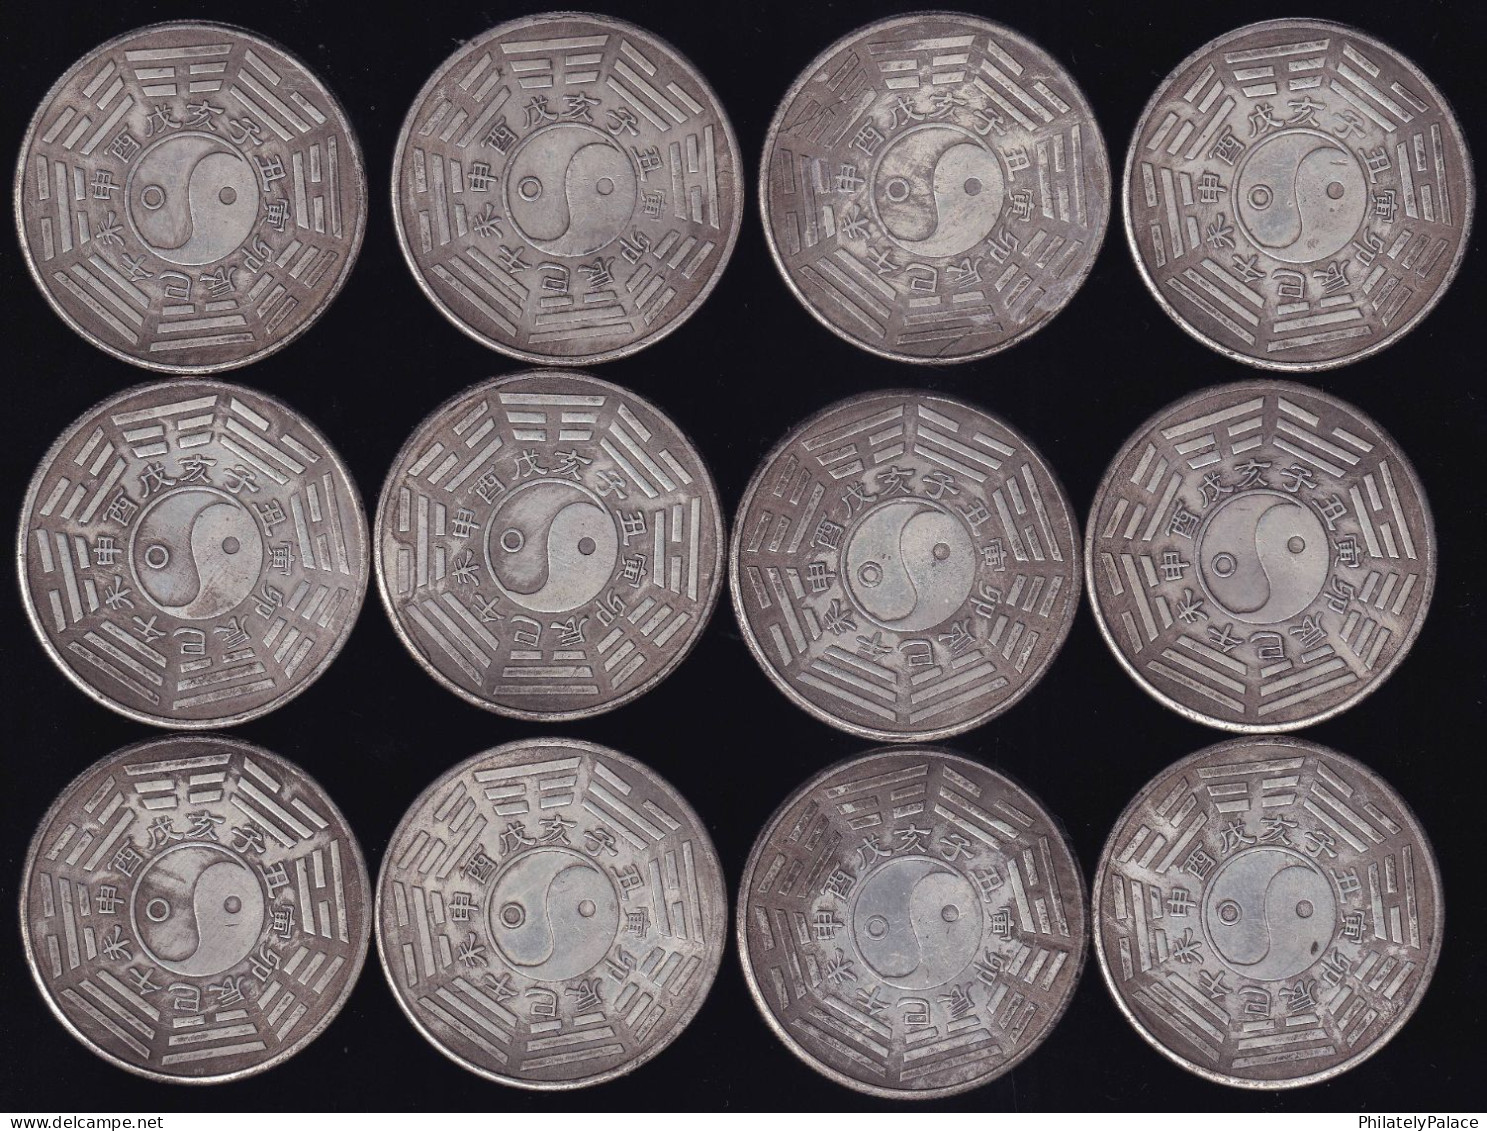 China Commemorative Token Coins Set Of 12 Chinese Lunar Zodiac Sign In Legend, Tiger,Dragon,Snake,Dog,Monkey,Hen,(**) - Other - Asia